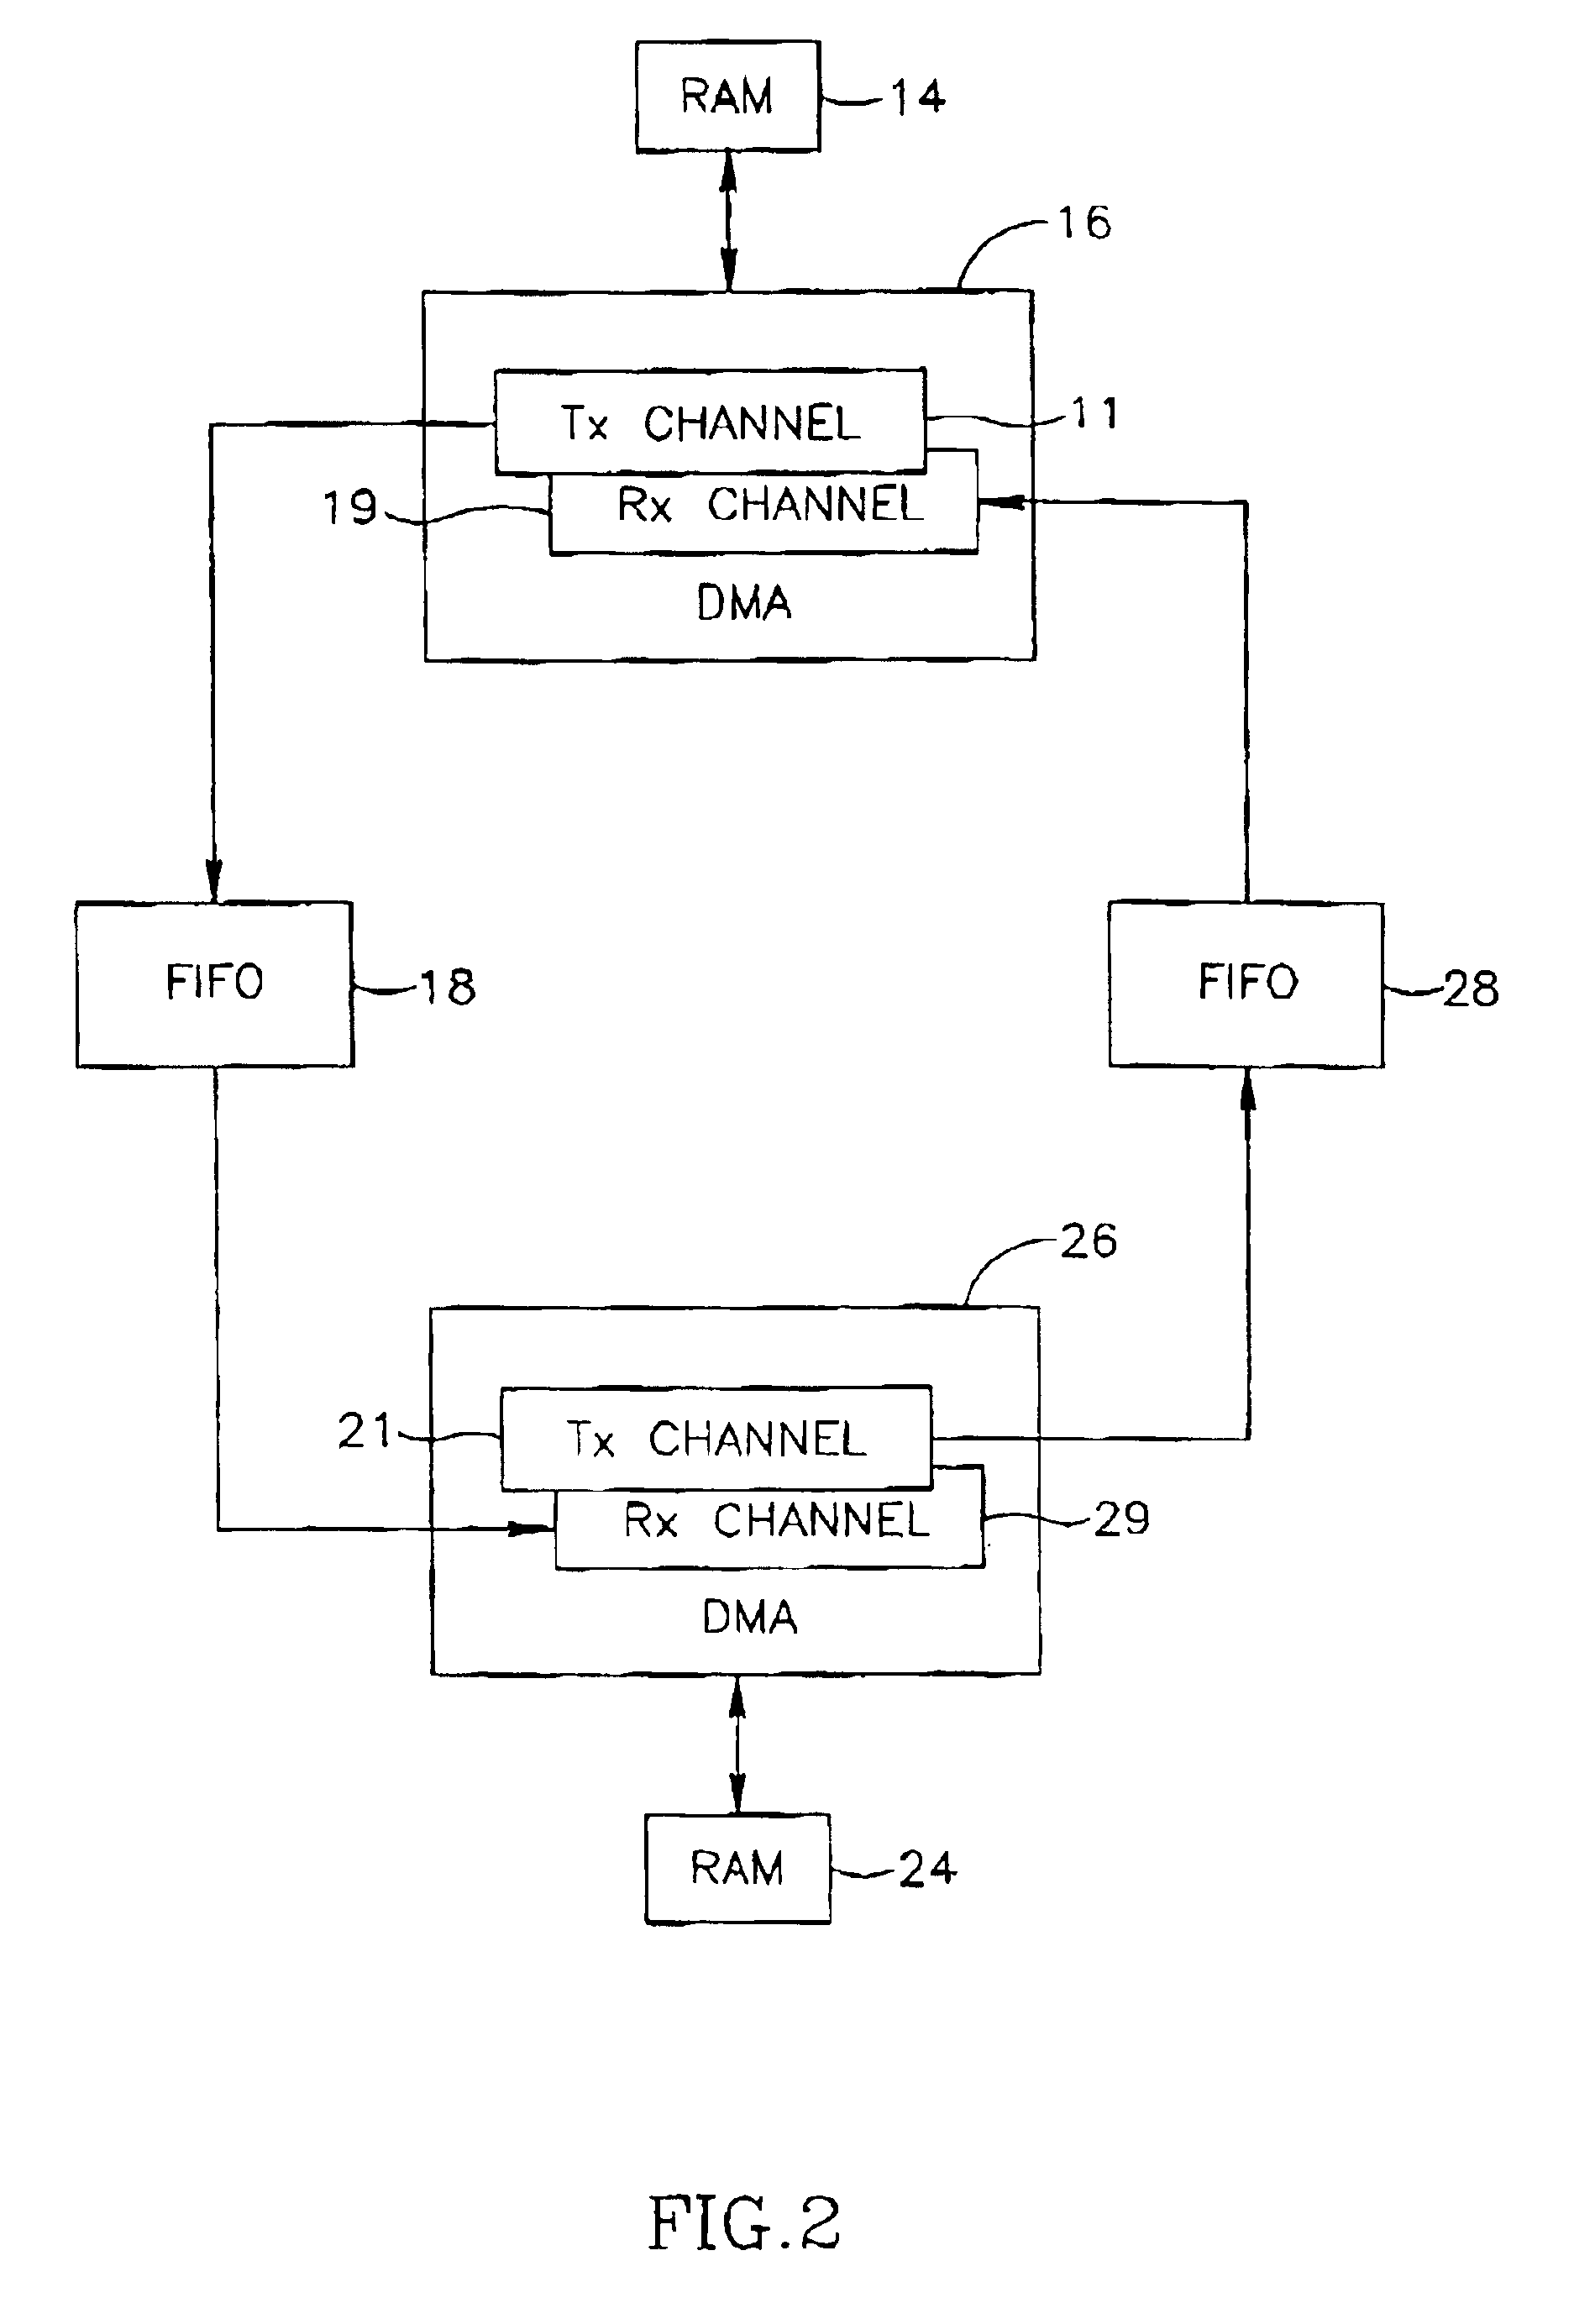 Communication between two embedded processors